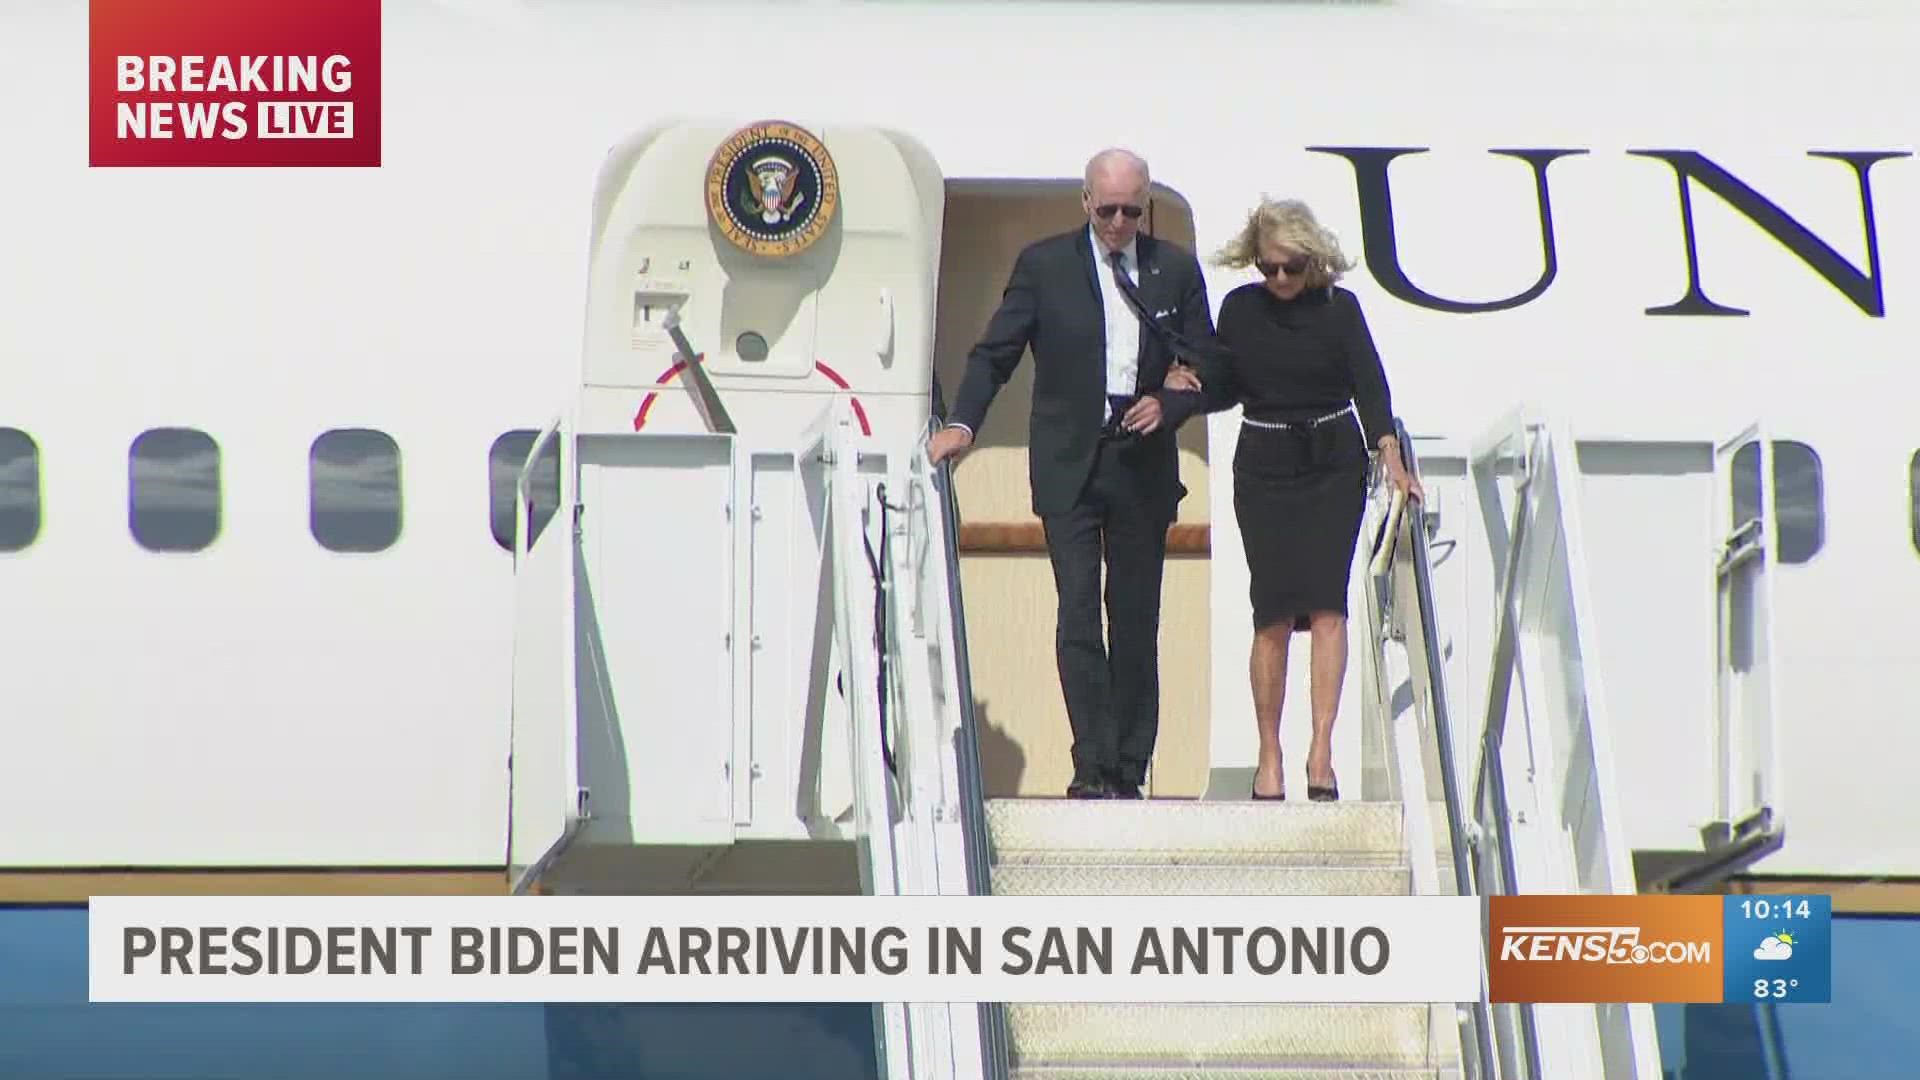 The Bidens will grieve with the Uvalde community after the Robb Elementary School shooting.